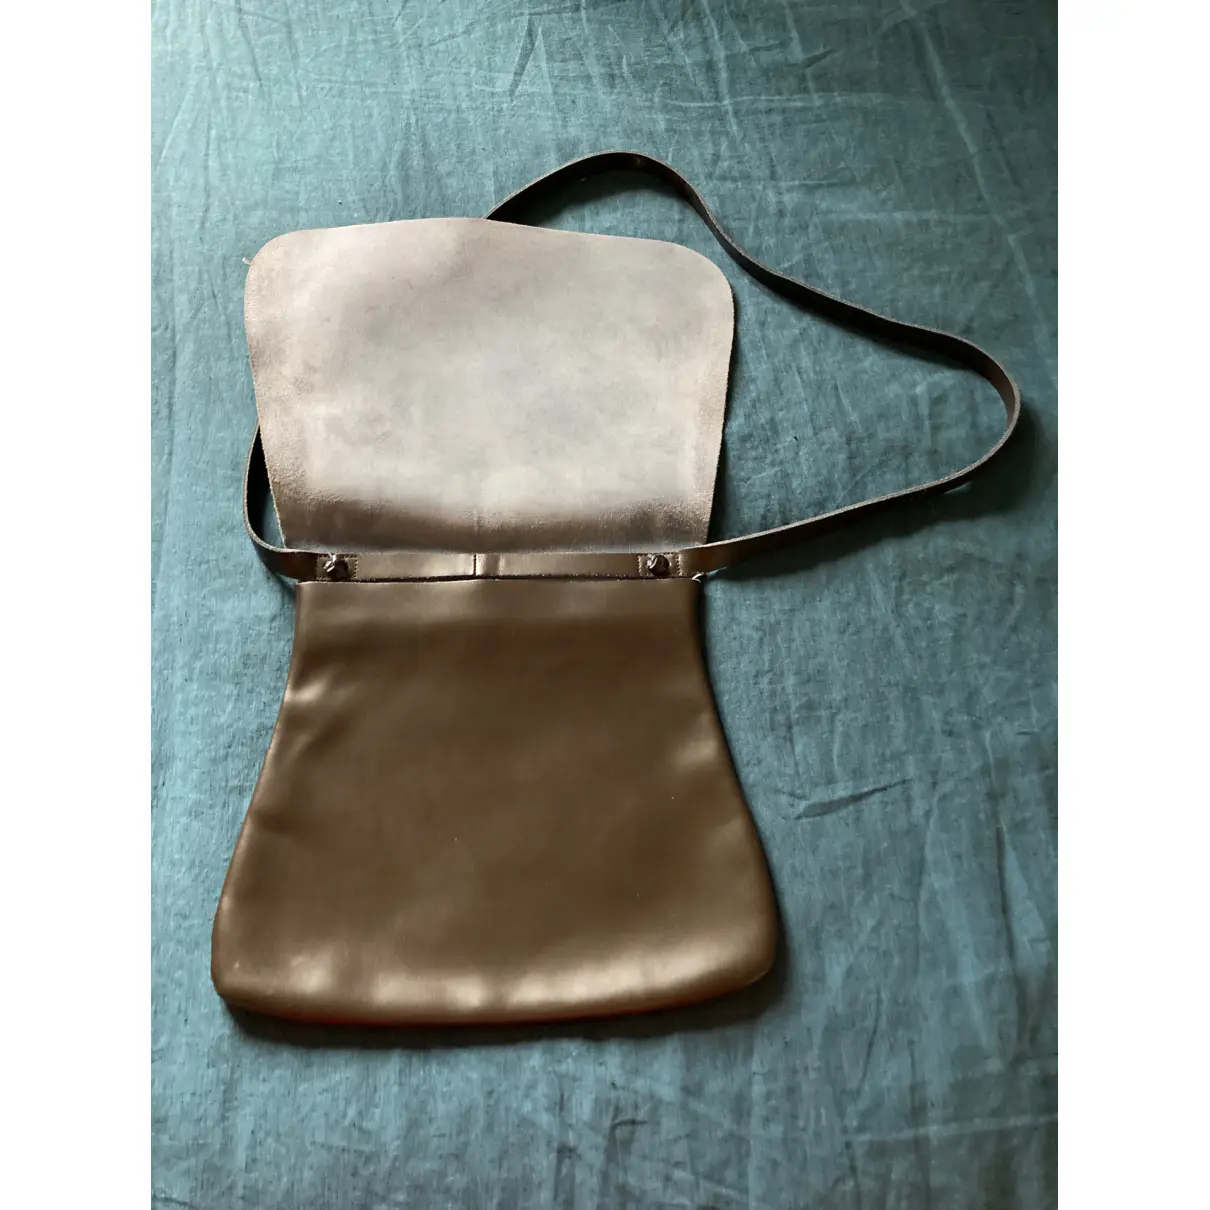 Leather bag LA BAGAGERIE